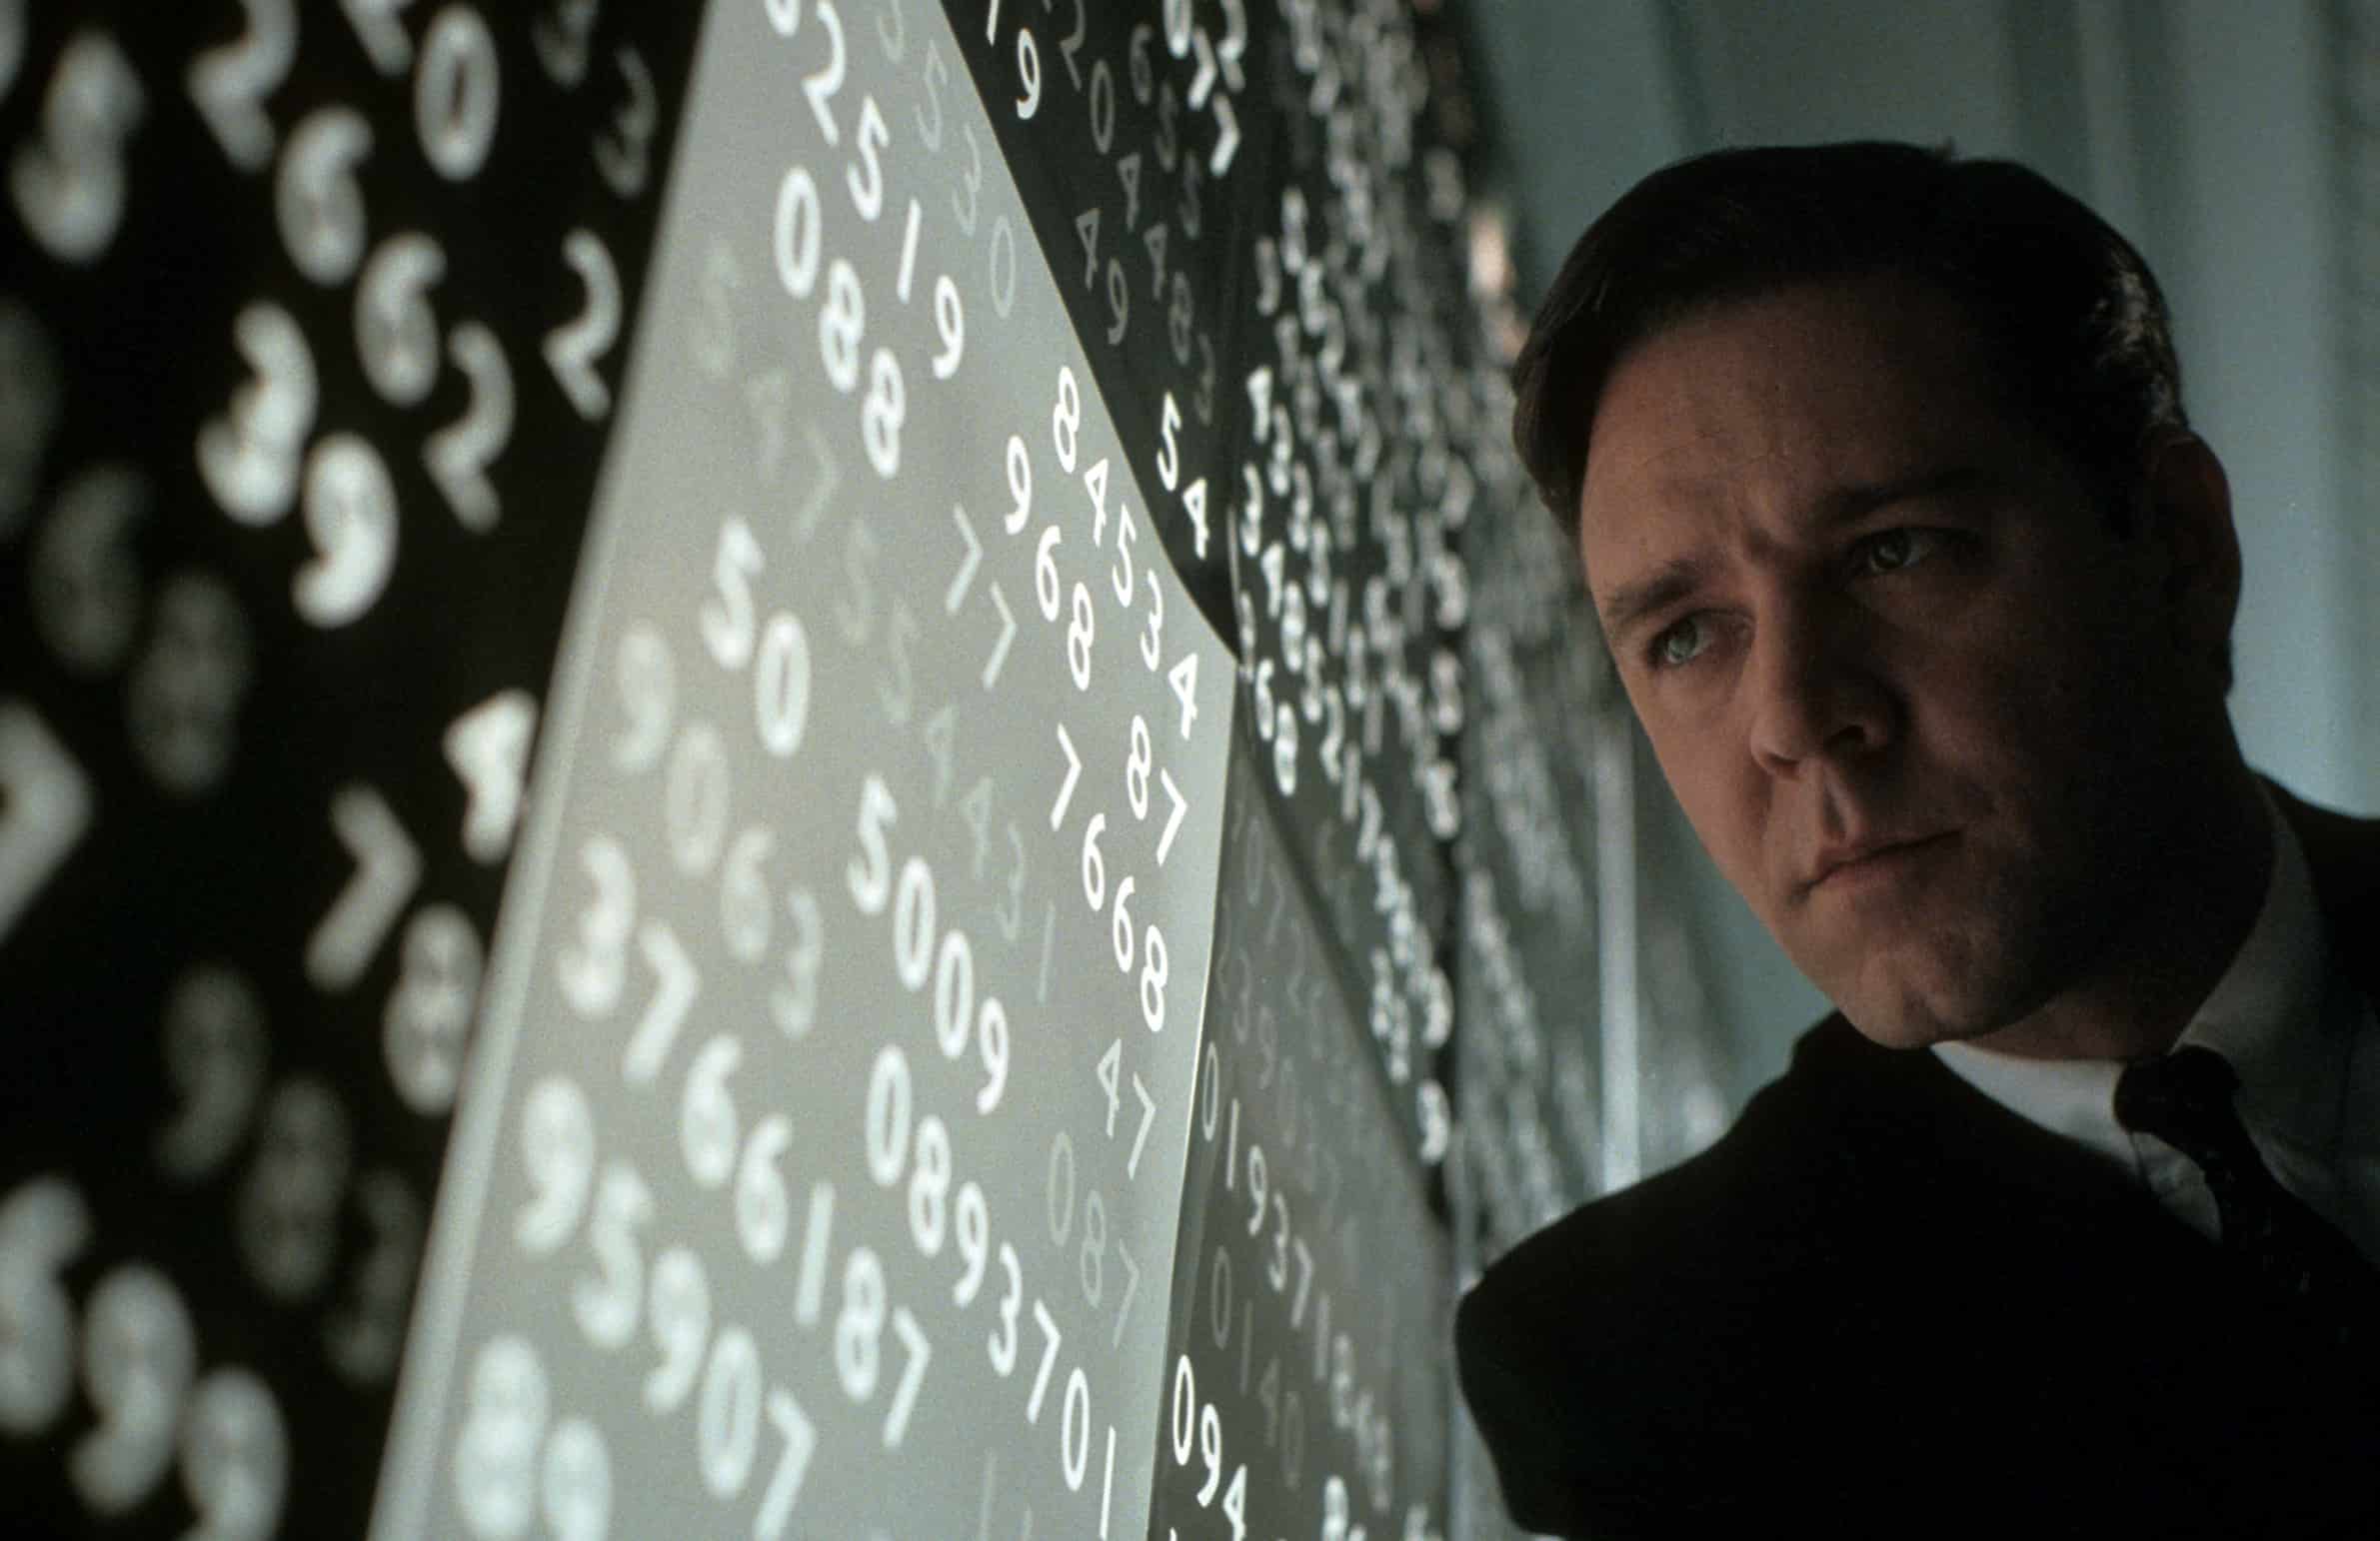  A man studies complex mathematics in this image from Universal Pictures.